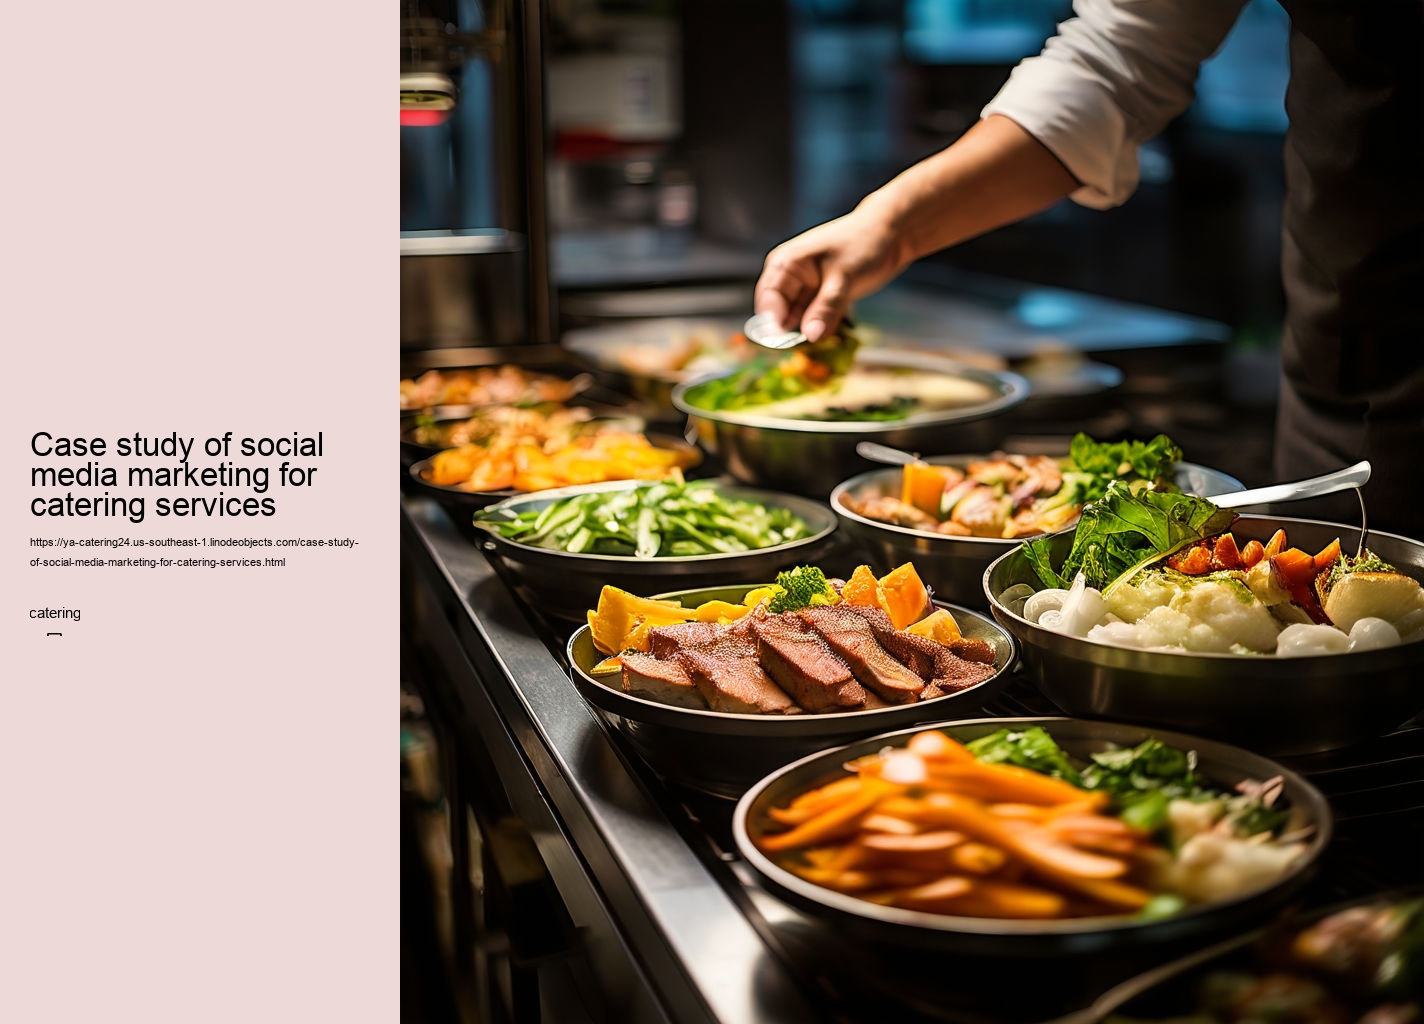 Case study of social media marketing for catering services